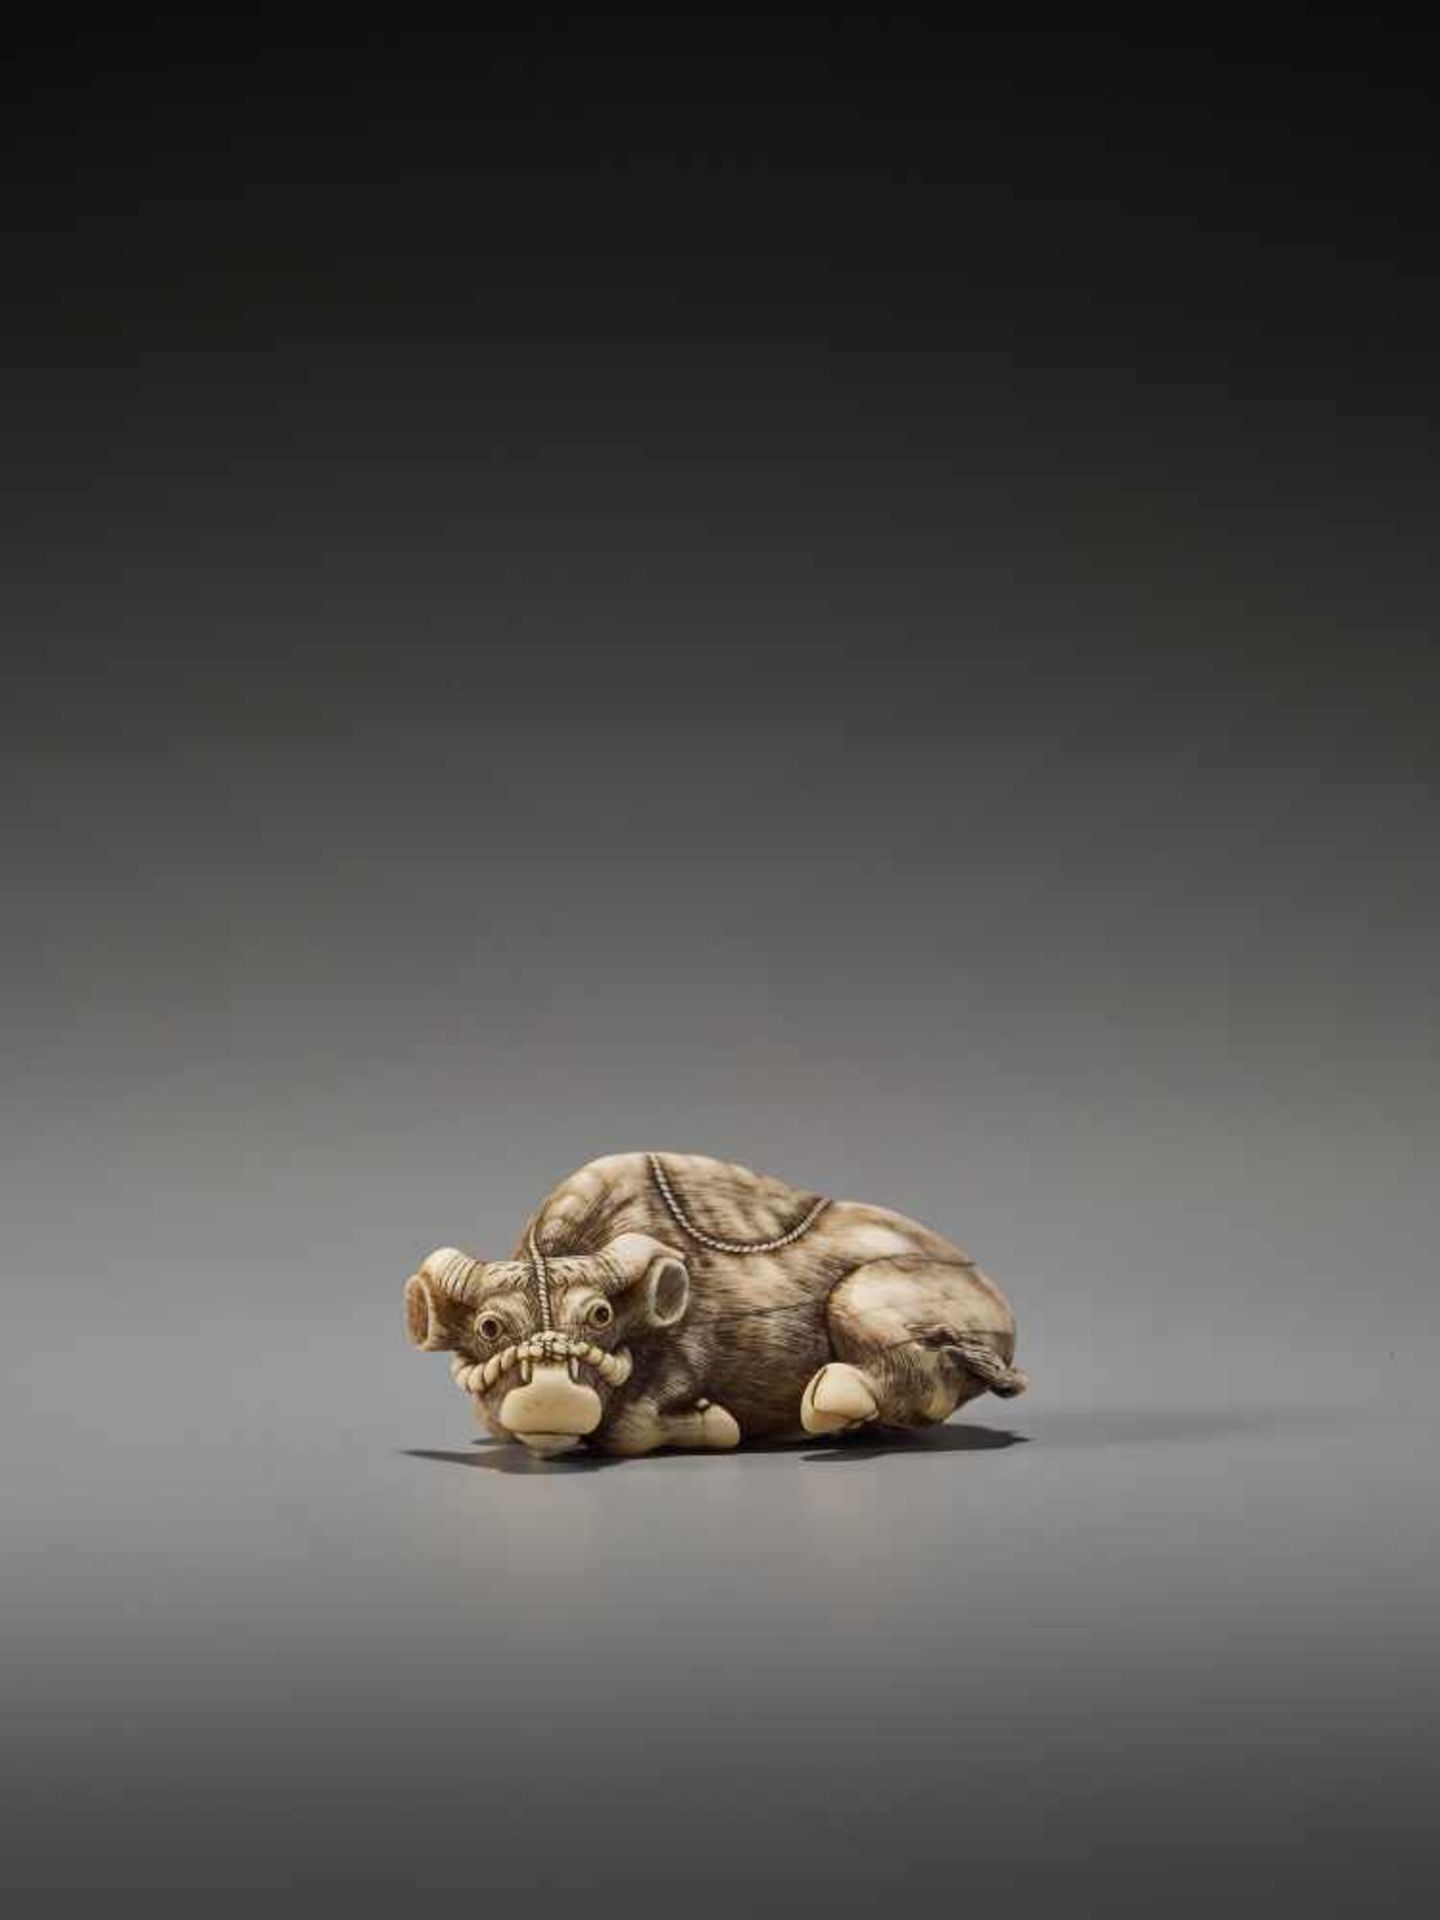 AN EXCELLENT IVORY NETSUKE OF A RECUMBENT OX BY TOMOTADABy Tomotada, ivory netsukeJapan, Kyoto, 18th - Image 7 of 12